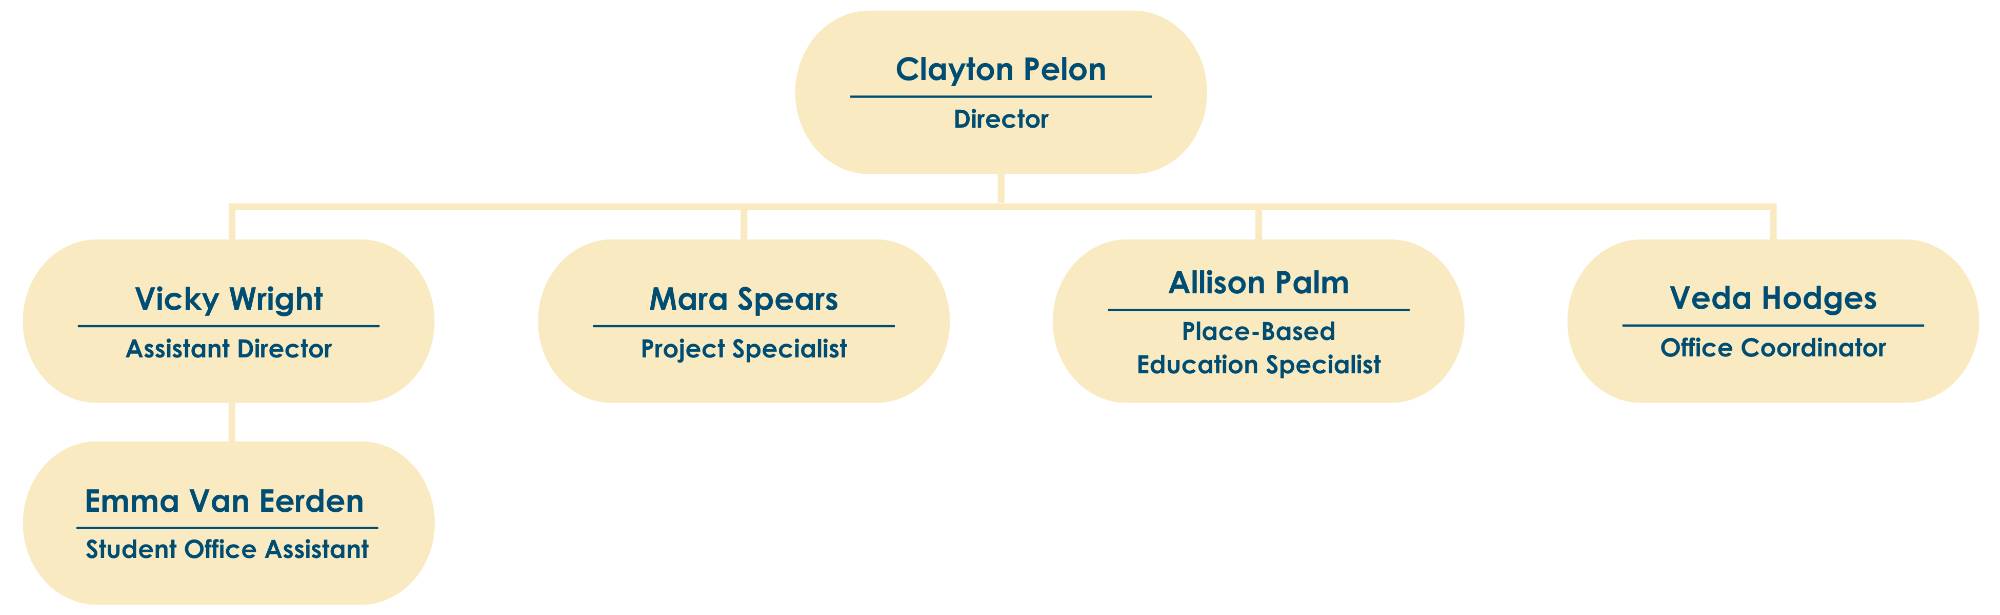 Staff organization chart showing director, assistant director, project specialist, place-based education specialist, office coordinator, and student office assistant